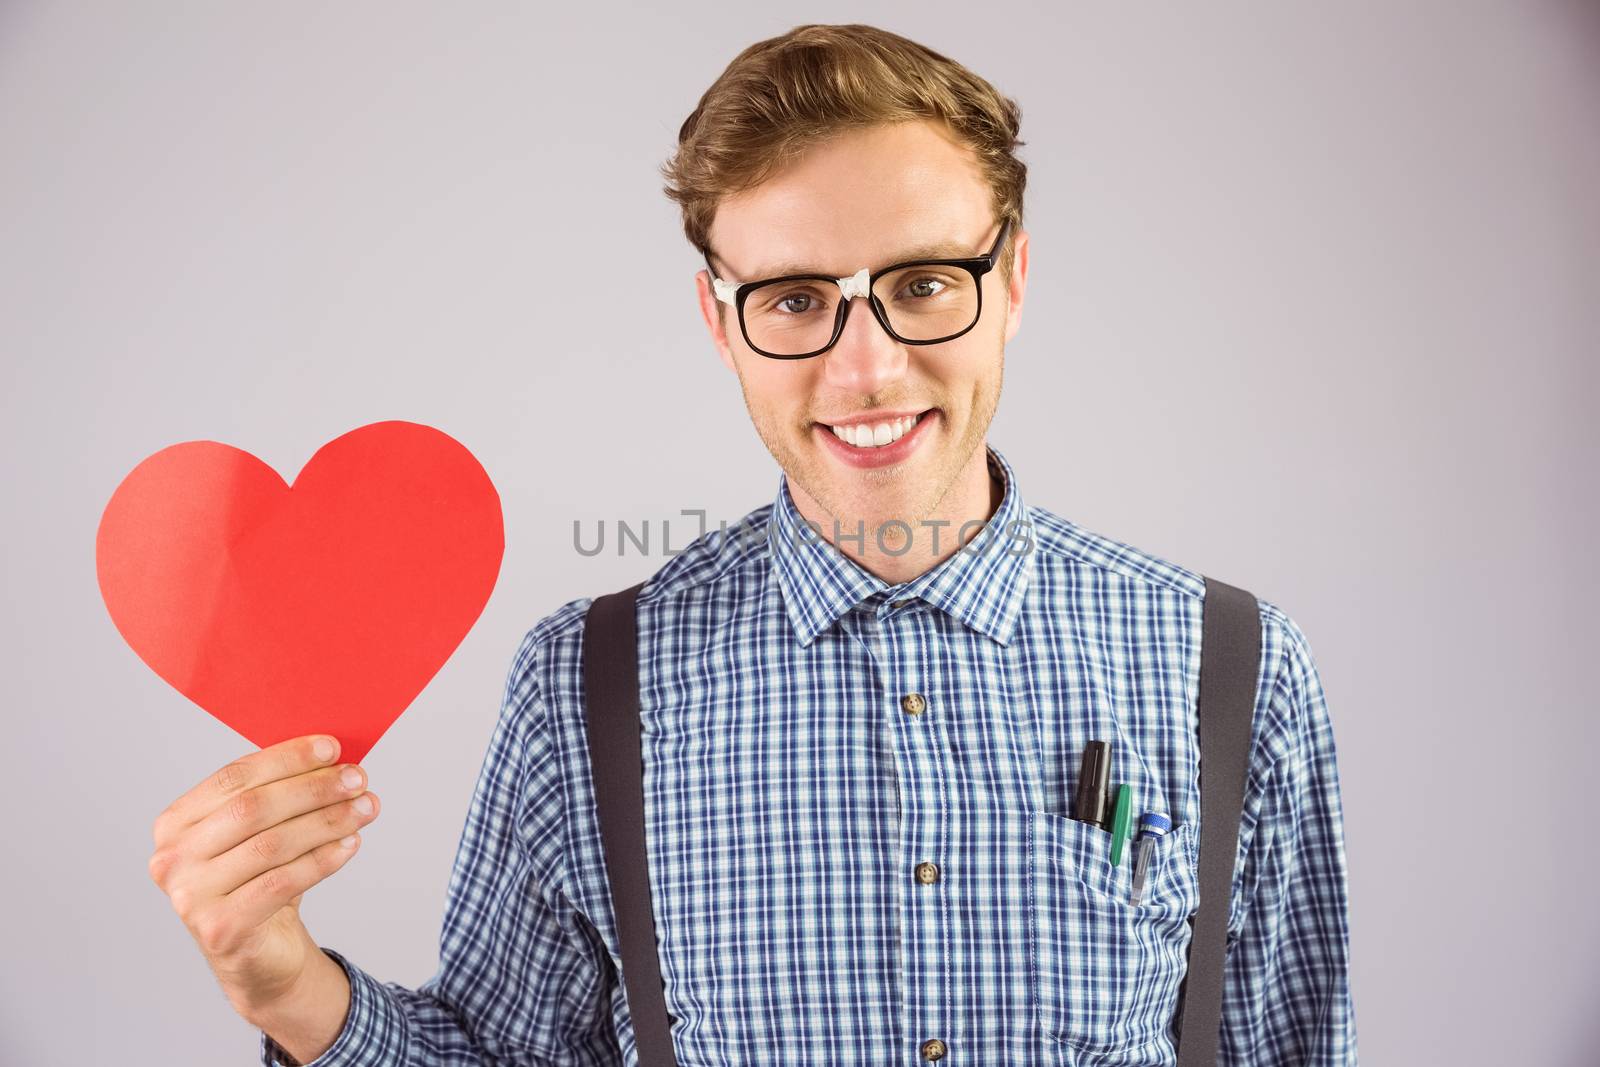 Geeky hipster holding a heart card on grey background